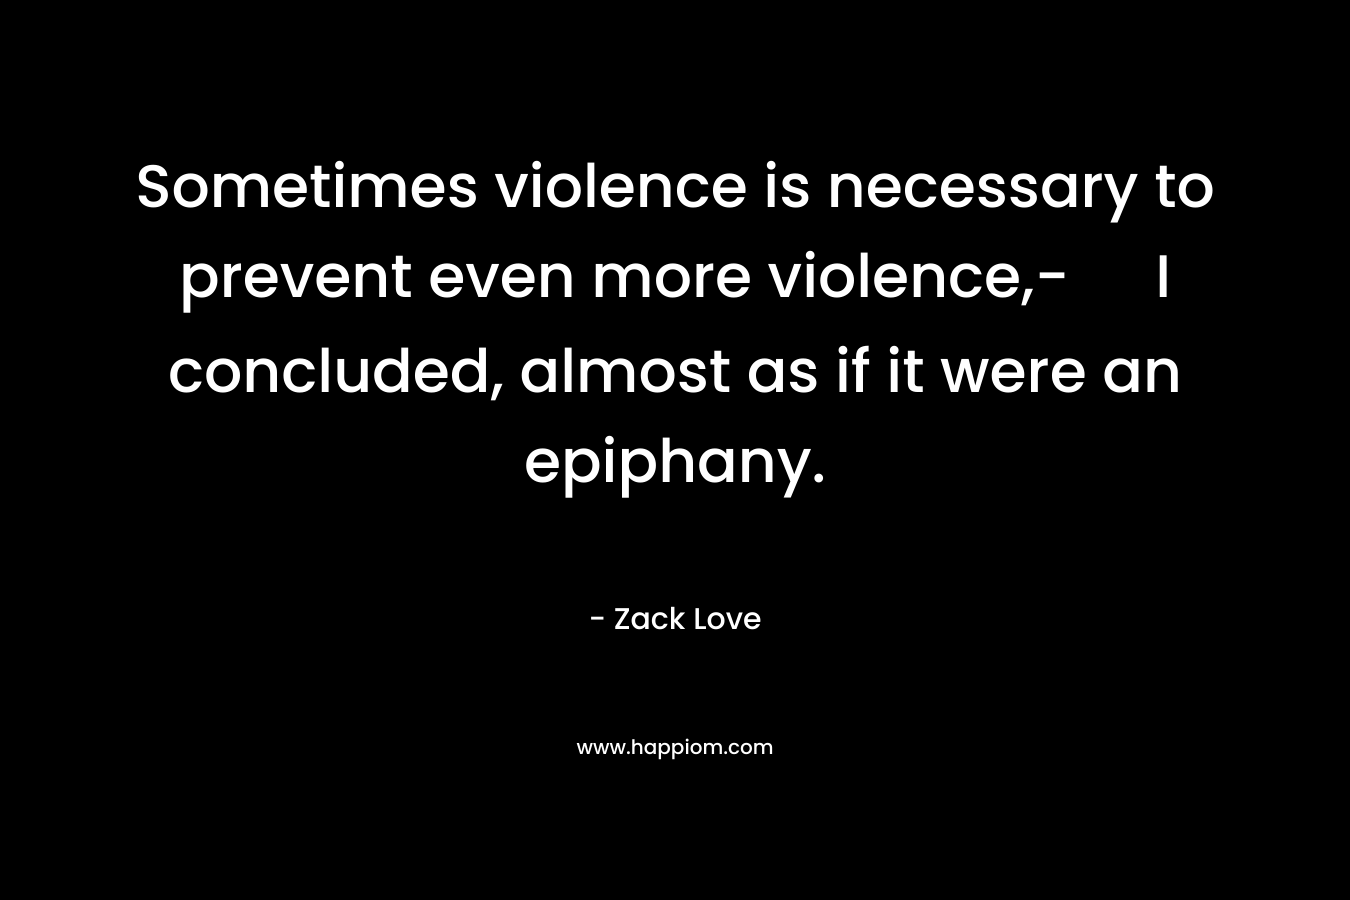 Sometimes violence is necessary to prevent even more violence,- I concluded, almost as if it were an epiphany. – Zack Love